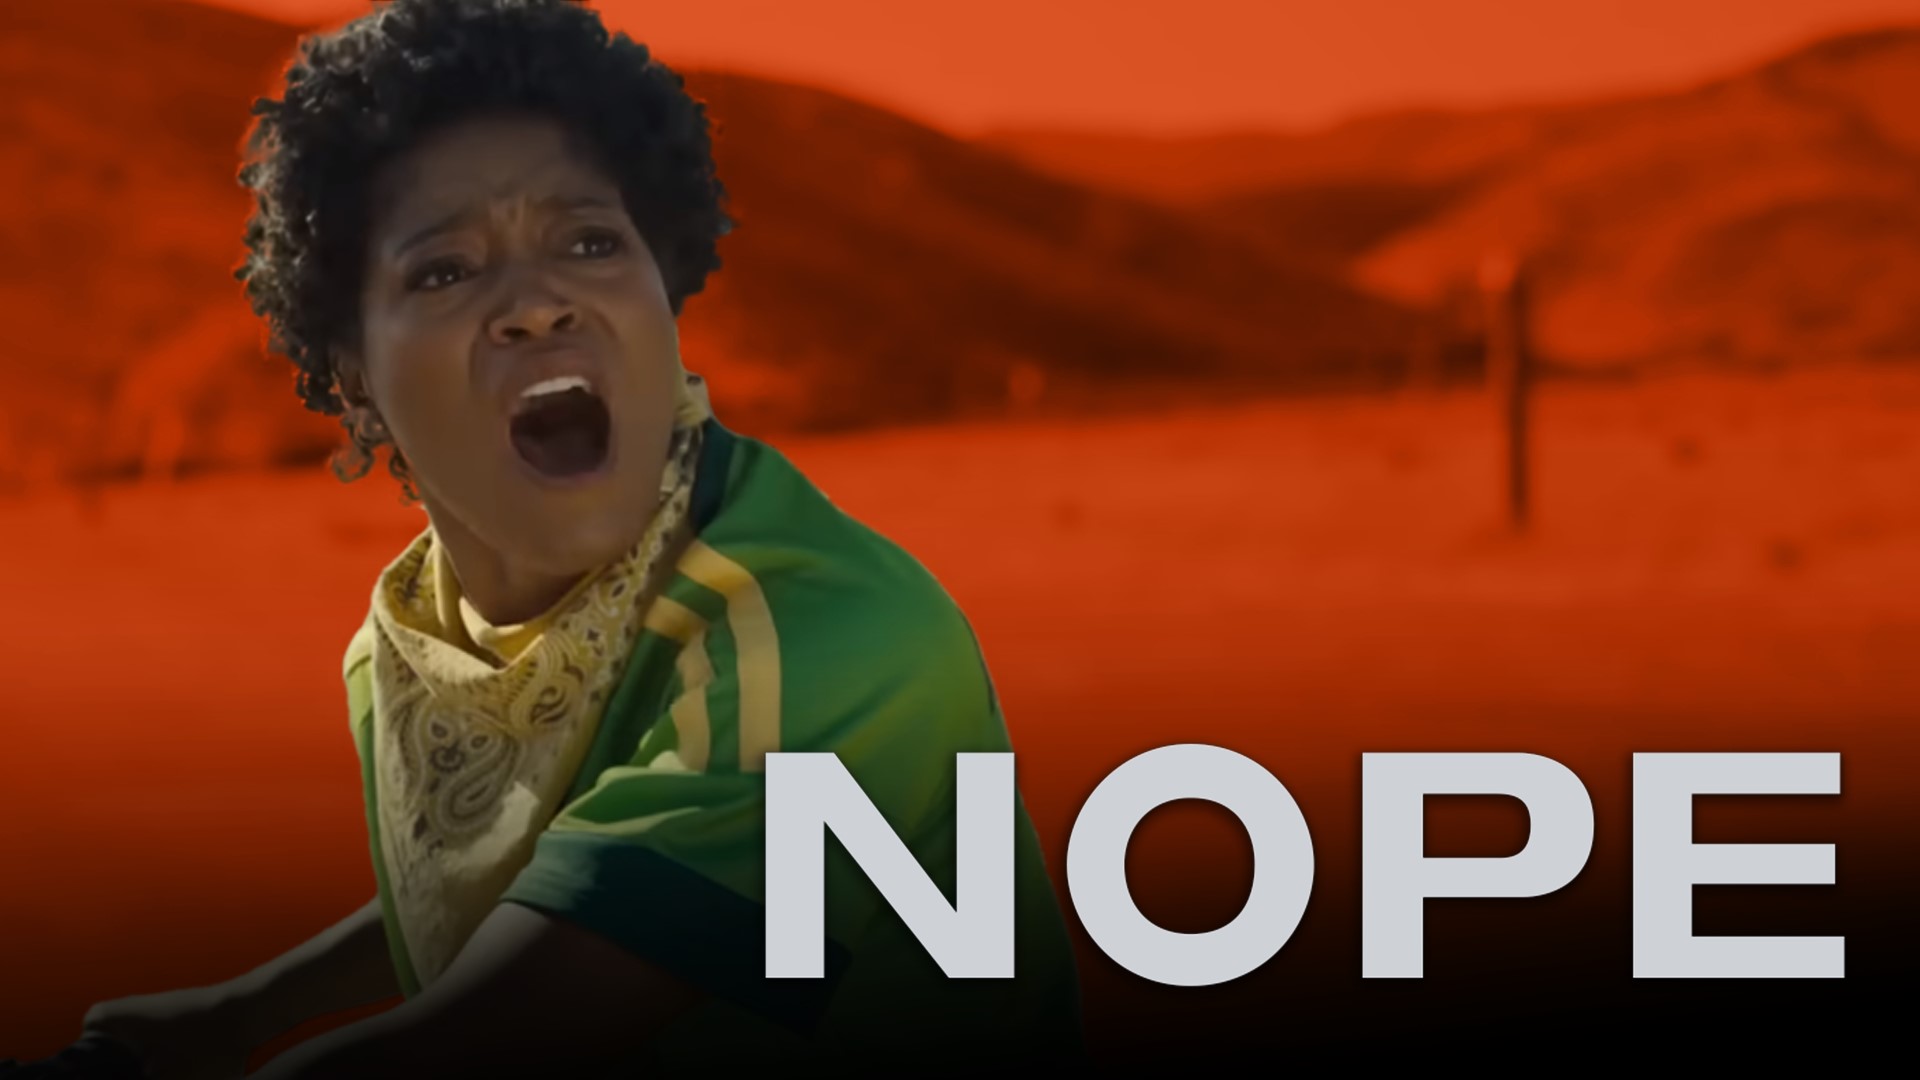 Jordan Peele continues his streak of great movies-- this time giving us Nope, a modern spin on the spectacle film that started with Jaws.